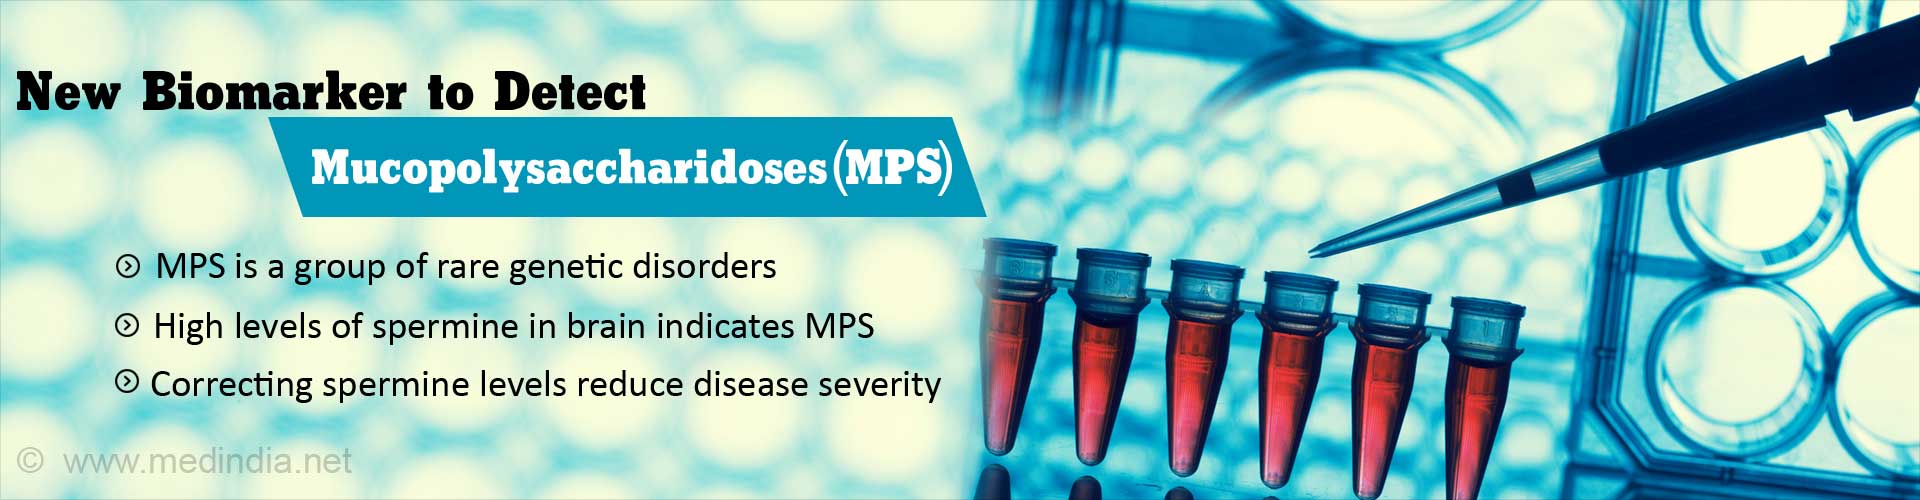 New biomarker to detect mucopolysaccharidoses (MPS)
- MPS is a group of rare genetic disorders
- High levels of spermine in brain indicates MPS
- Correcting spermine levels reduce disease severity